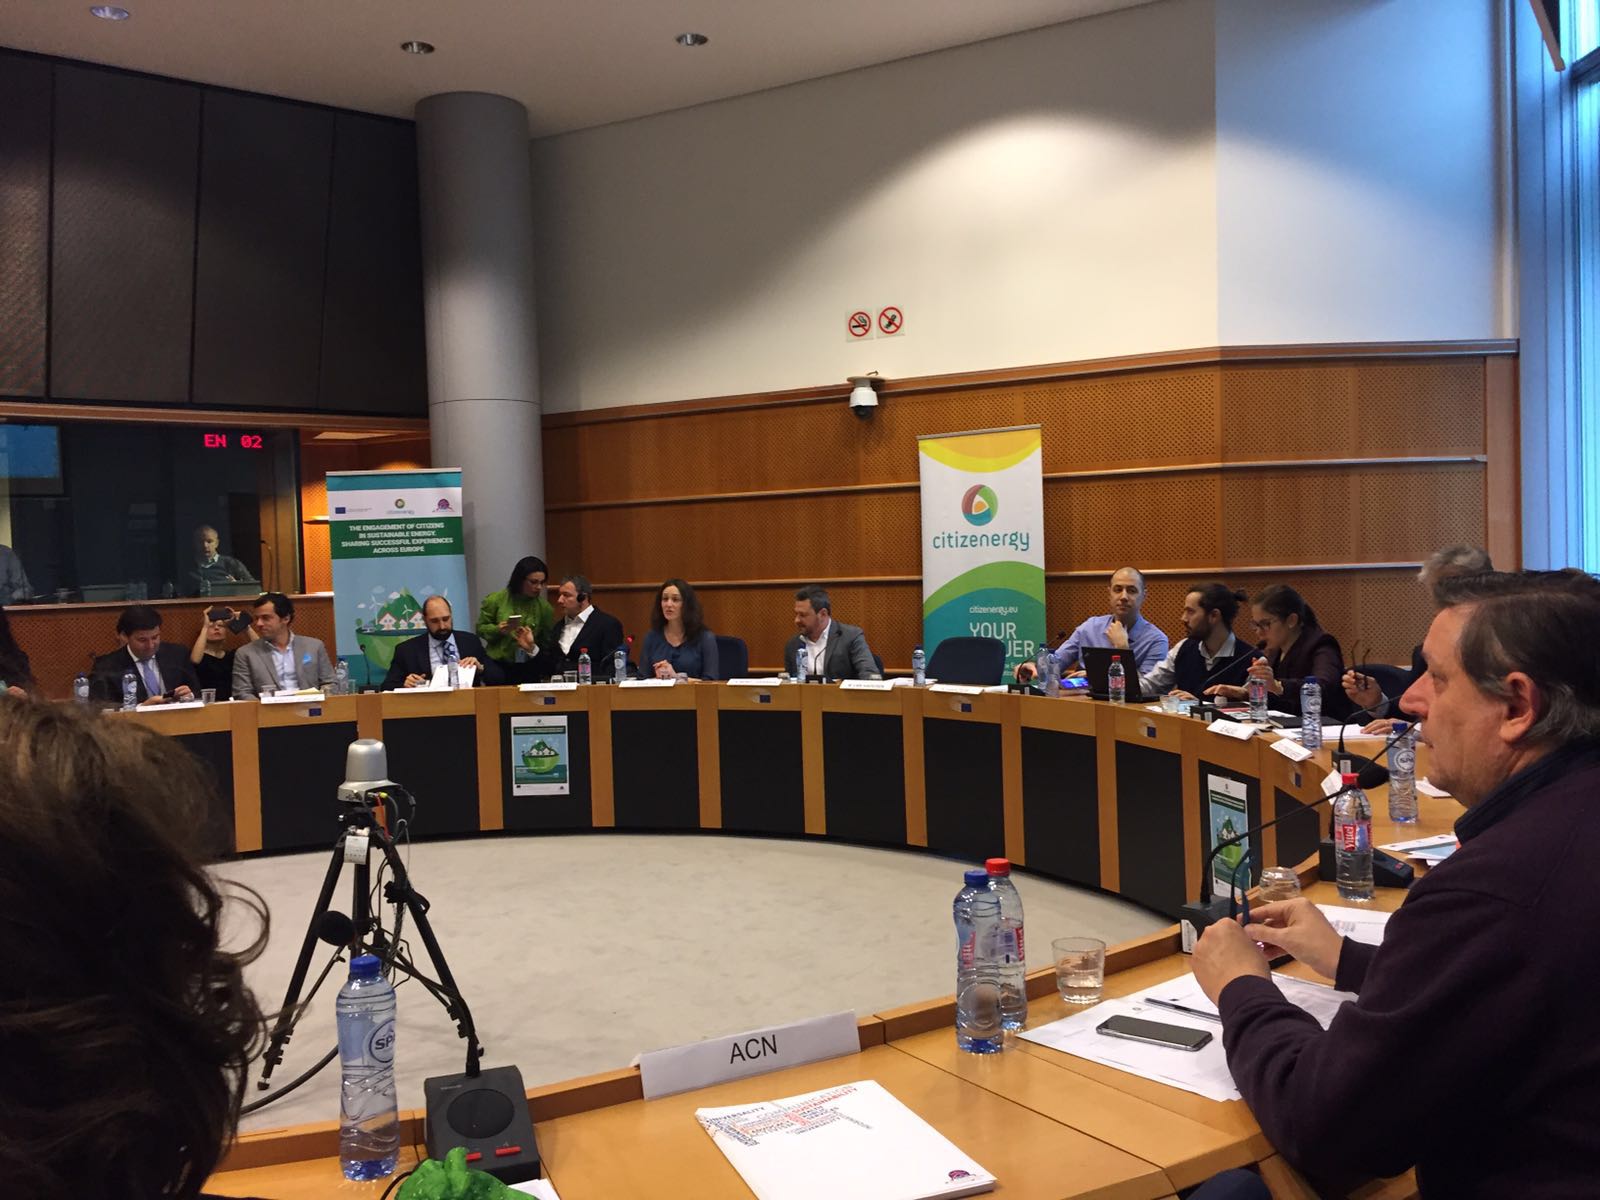 The Engagement of Citizens in Sustainable Energy – Sharing successful experiences across Europe (4)